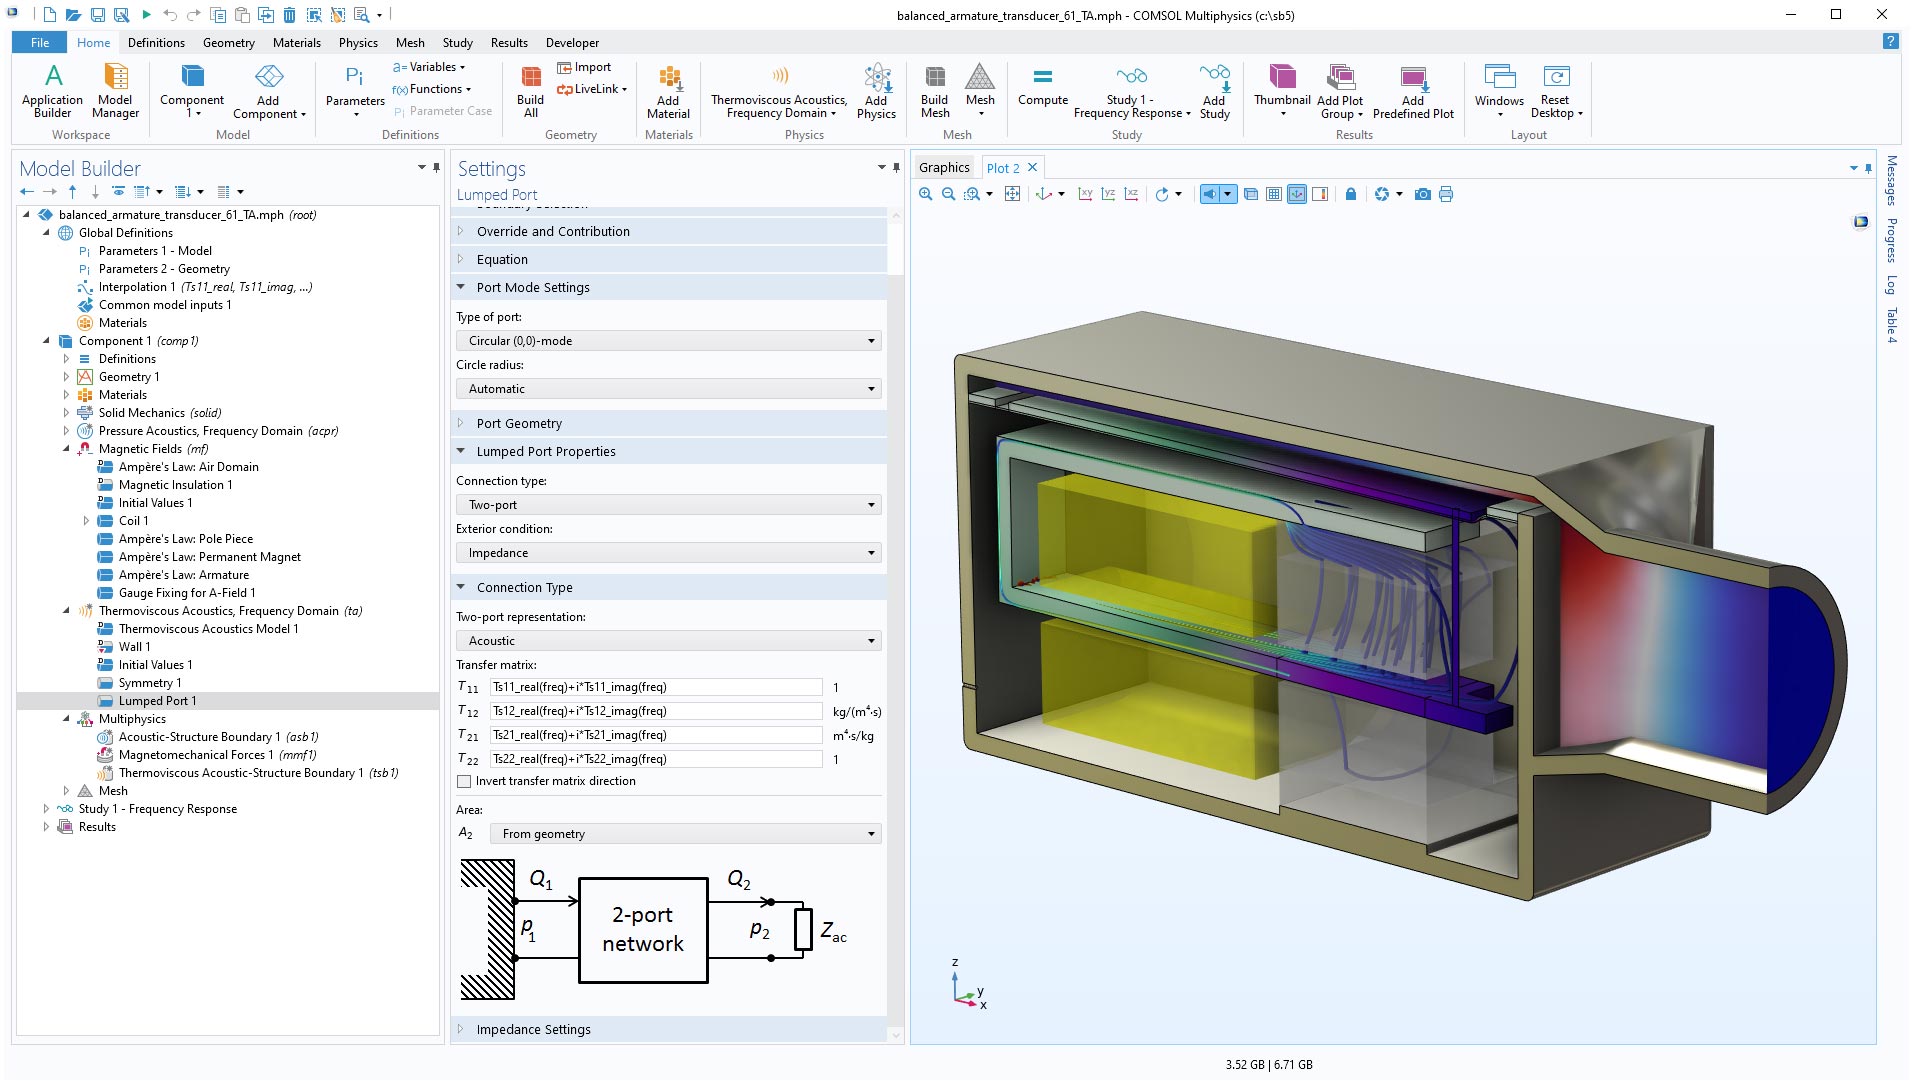 The COMSOL Multiphysics UI showing the Model Builder with the Lumped Port node highlighted, the corresponding Settings window, and a transducer model in the Graphics window.